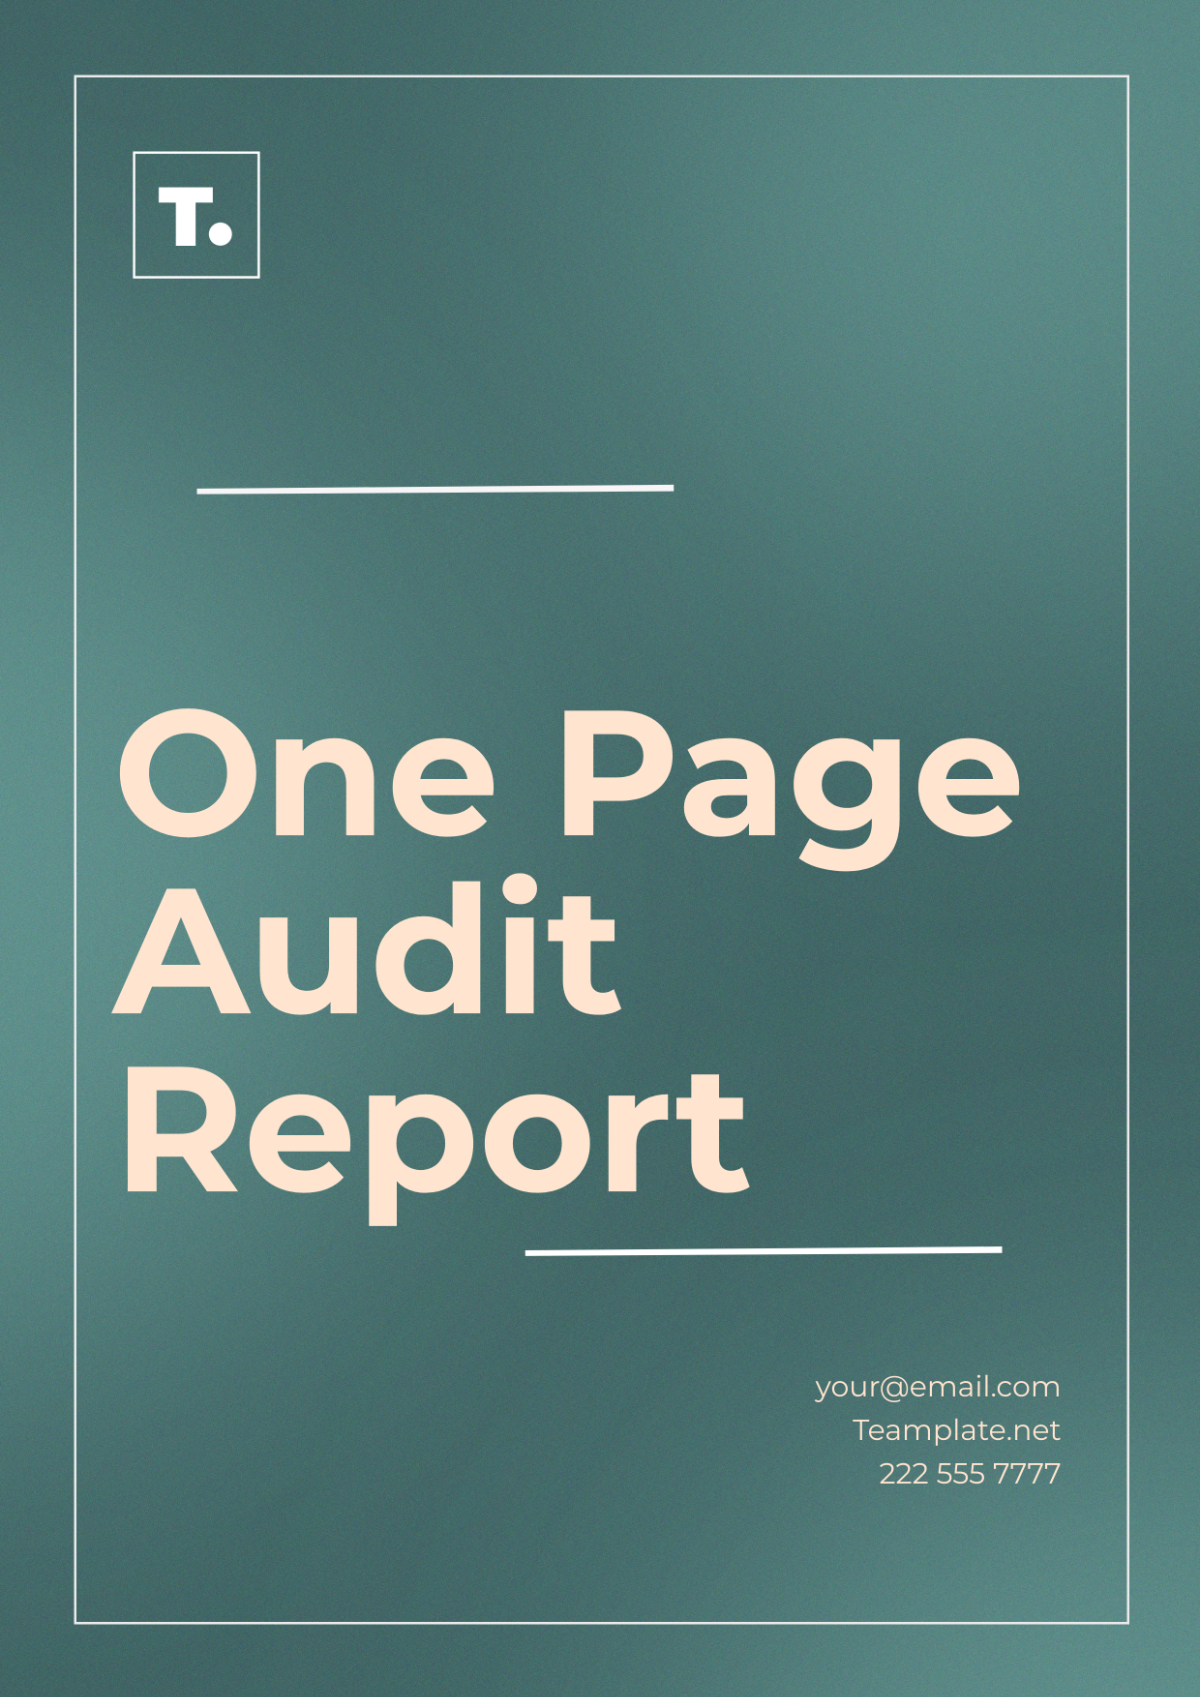 One Page Audit Report Template